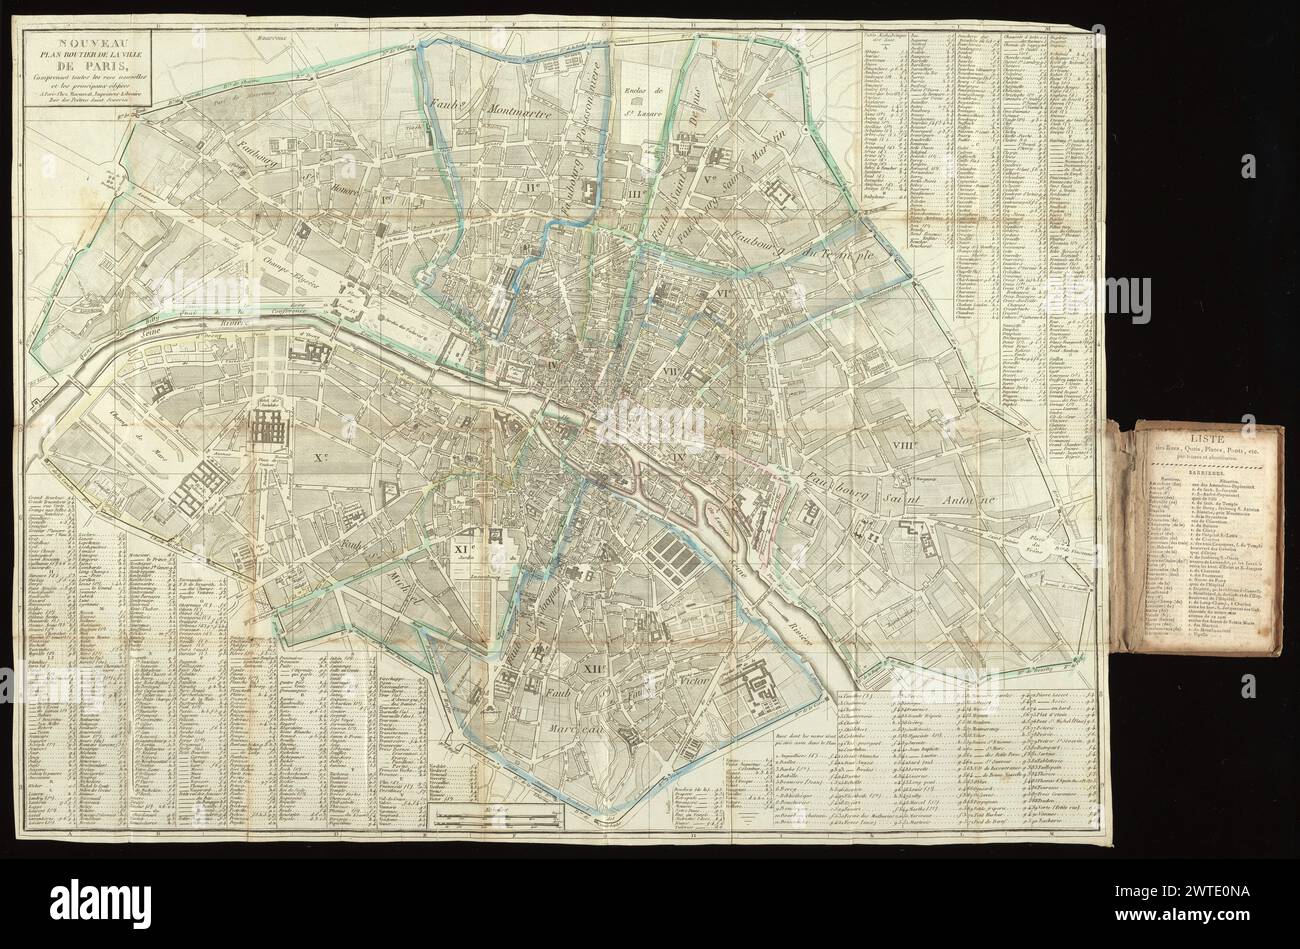 Nouveau plan routier de la ville de Paris, comprenant toutes les rues nouvelles et les principaux édifices, 1820. [1820] Date from label on p. [1] of cover. Title panel at upper left corner. 'Table alphabétique des rues' in remaining corners, indexed to squares on plan labelled A-I, K-M and 1-9. Two scale bars at foot of 500 toises (74 mm) and 500 meters (76.5 mm) imply scales of approximately 1:13,000 and 1:6,500 respectively; the second bar should apparently be for 1000 meters. Boundaries of the mairies traced in color. Plan pasted to p. [2] of pasteboard cover. On p. [1] of cover is oval le Stock Photo